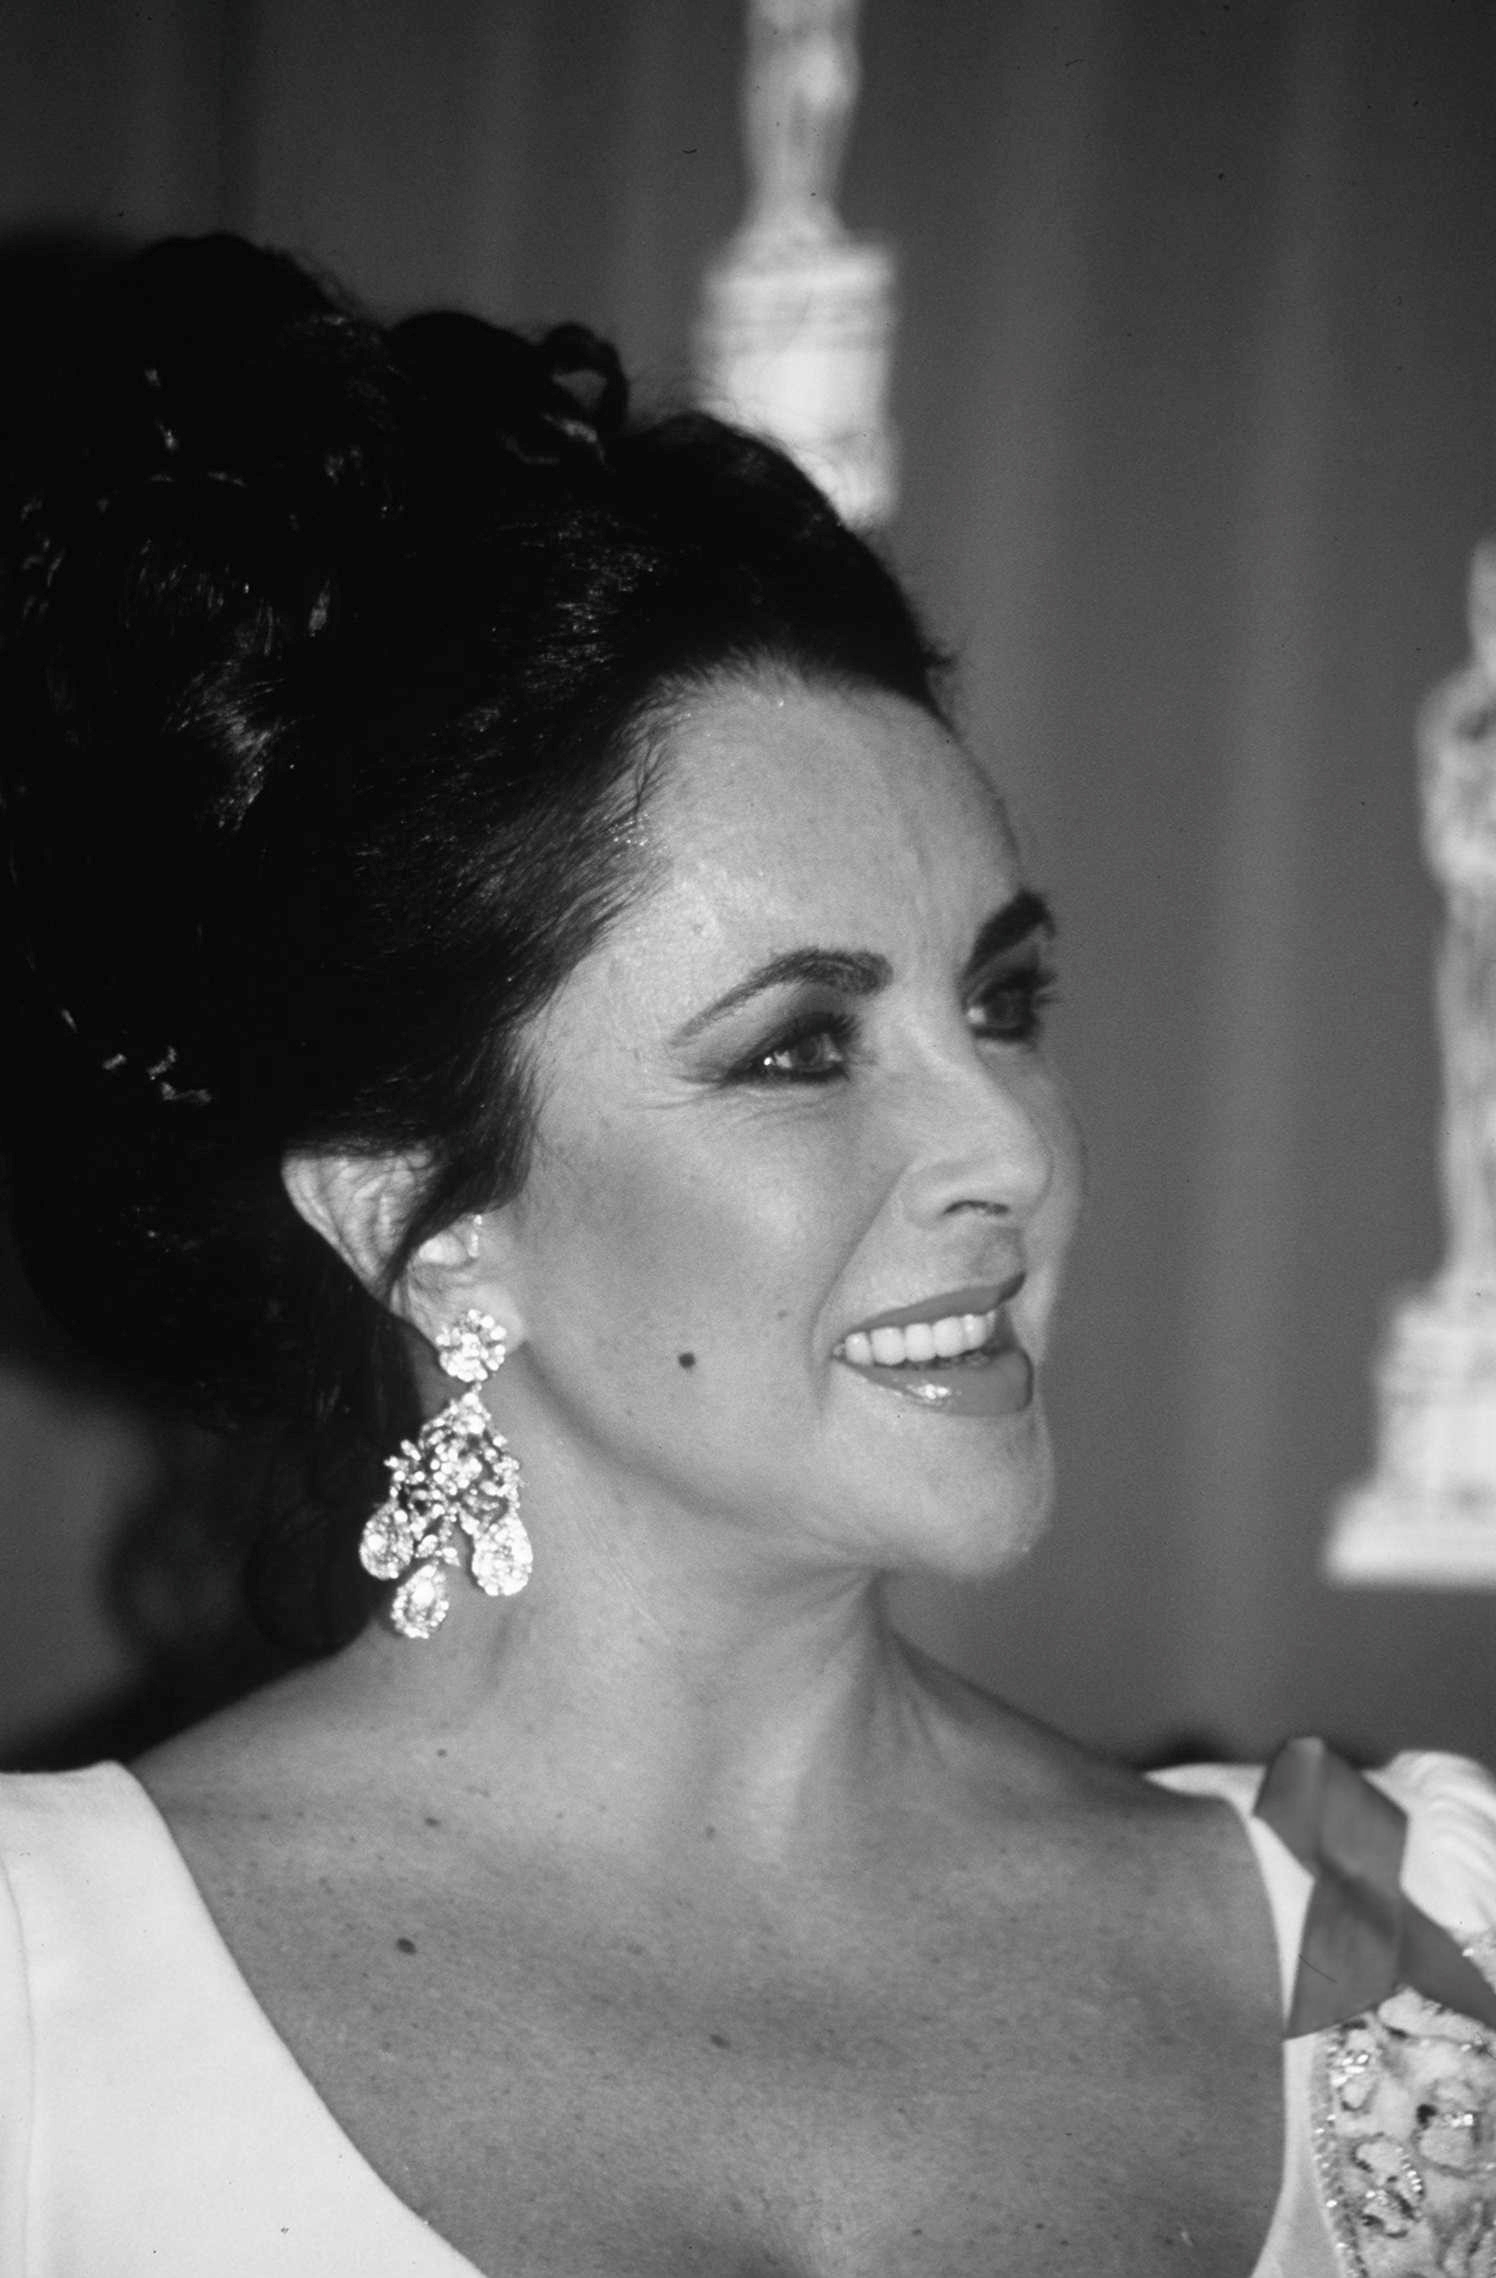 A dressed-up Elizabeth Taylor smiles and gazes to her left.